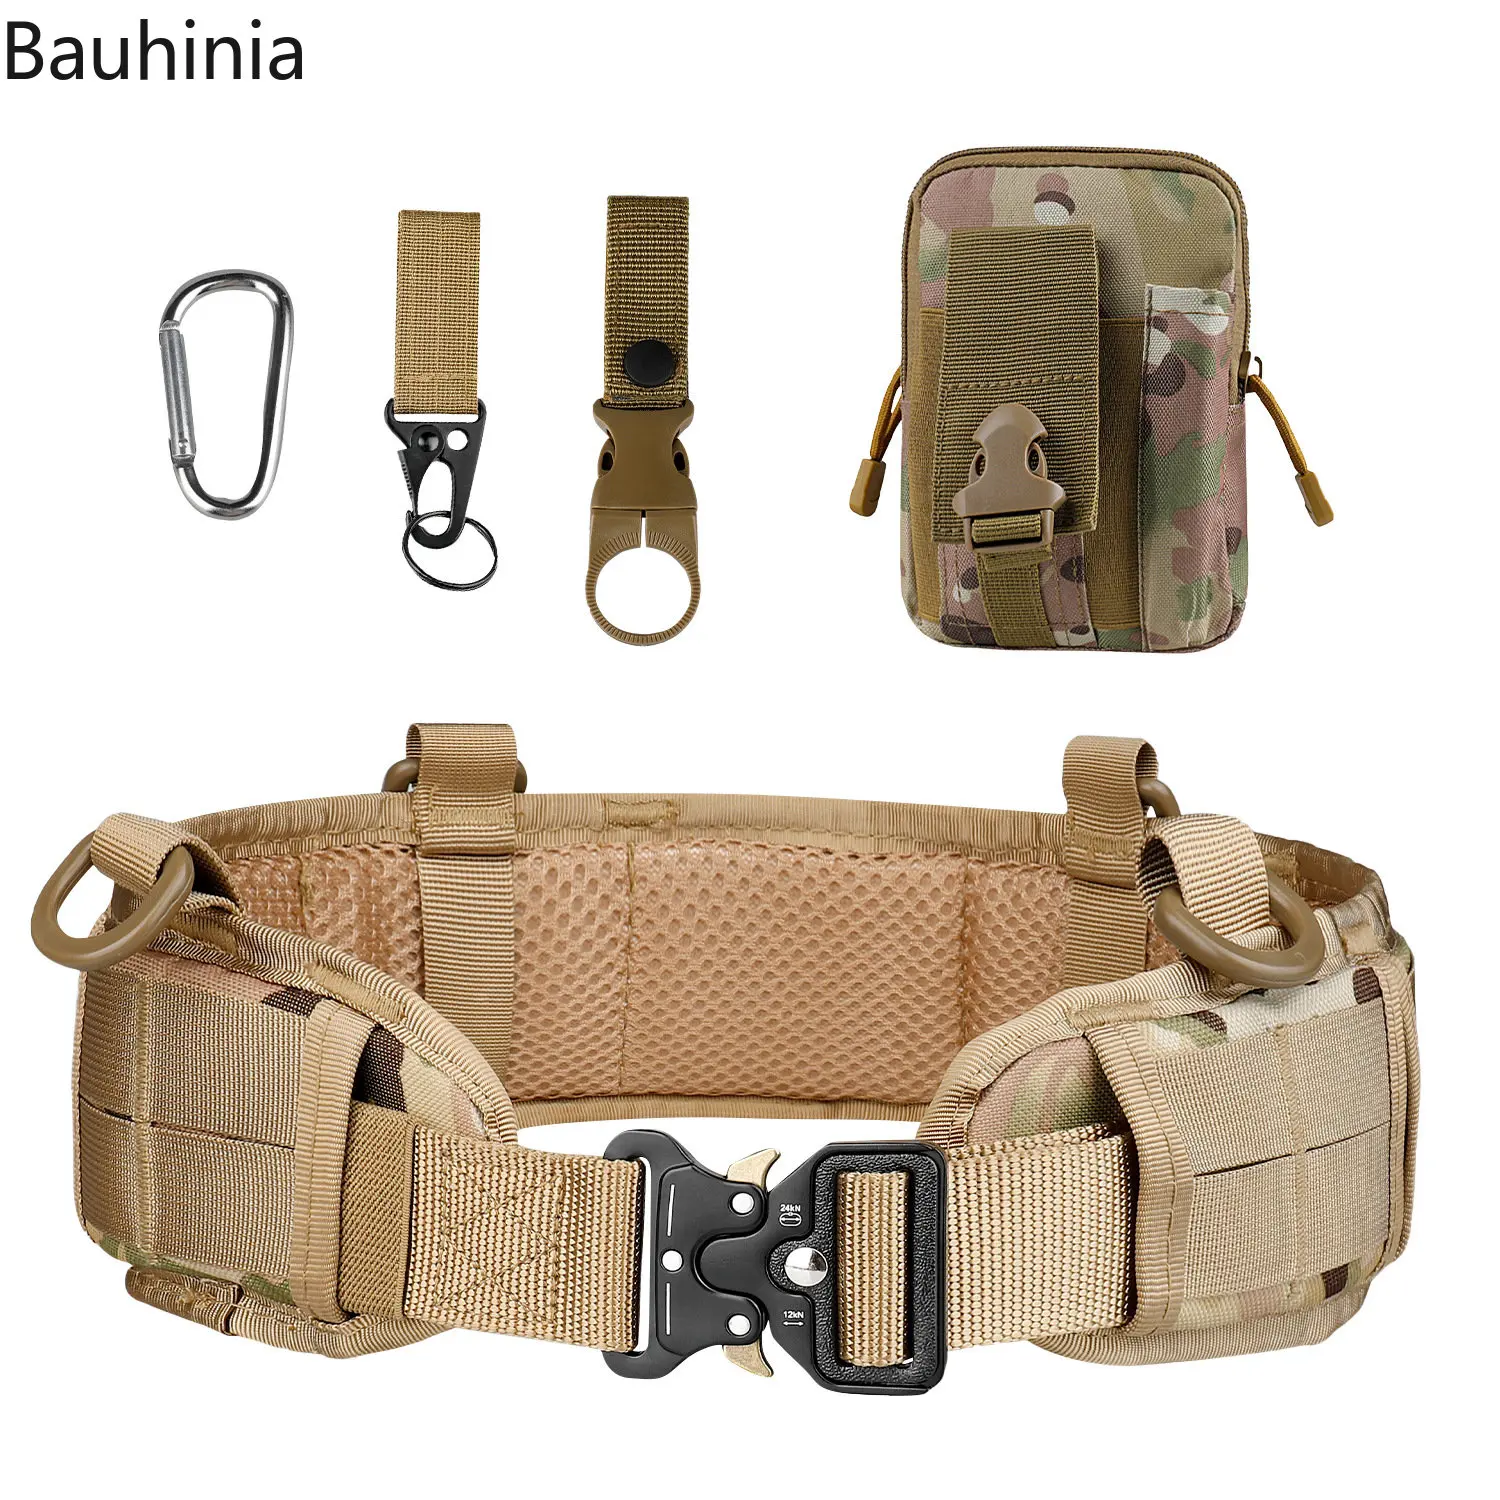 Bauhinia 125*3.8cm Thickened Nylon Outdoor Men's Tactical Belt Alloy Buckle Head Fashion Multifunction Waist Pack Set Jeans Belt